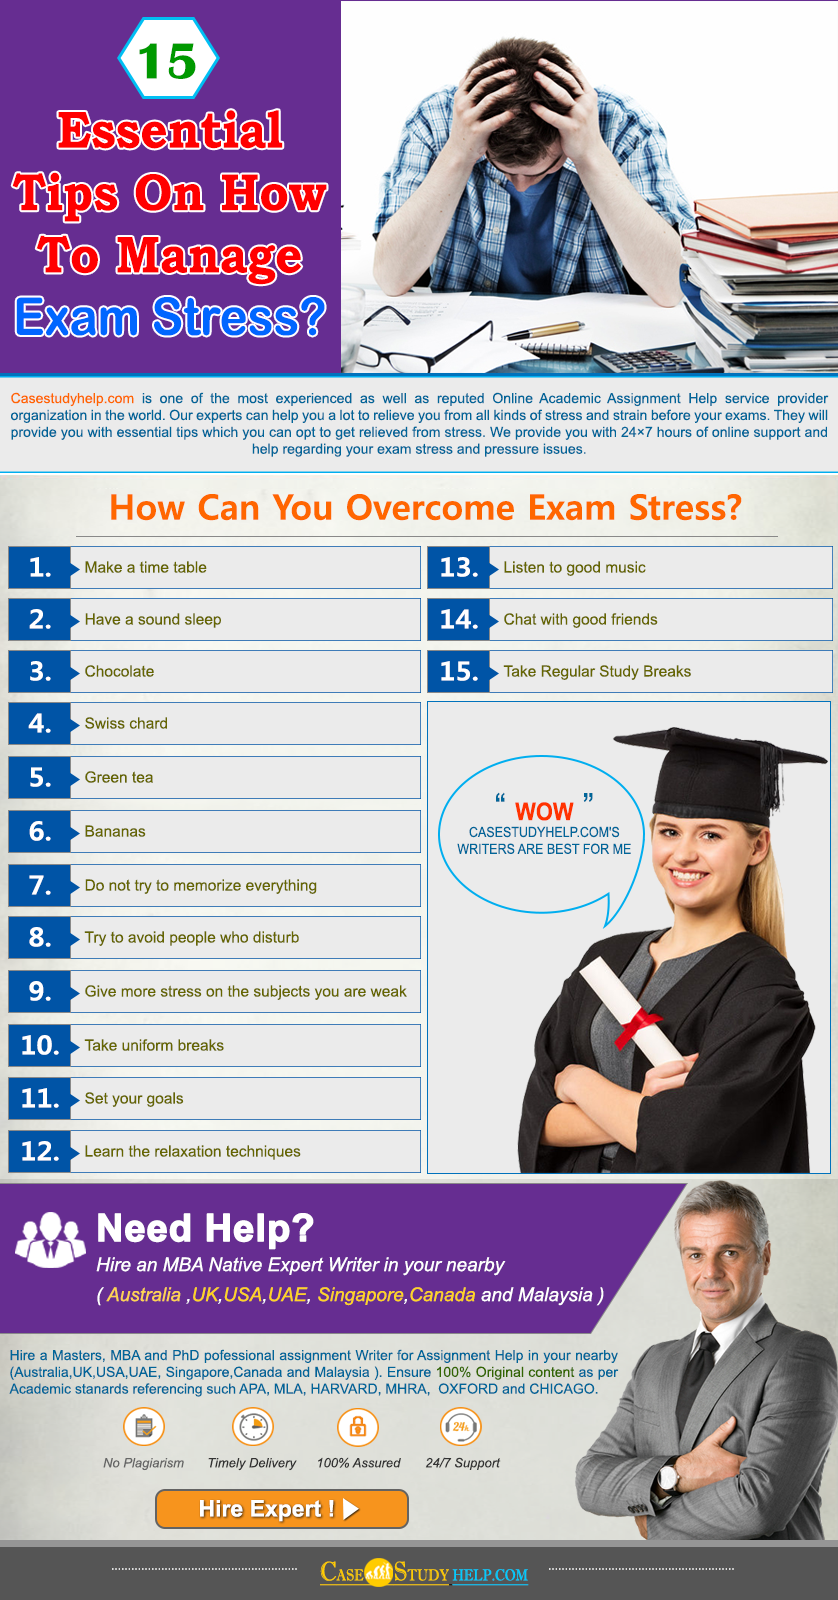 15-Essential-Tips-On-How-To-Manage-Exam-Stress